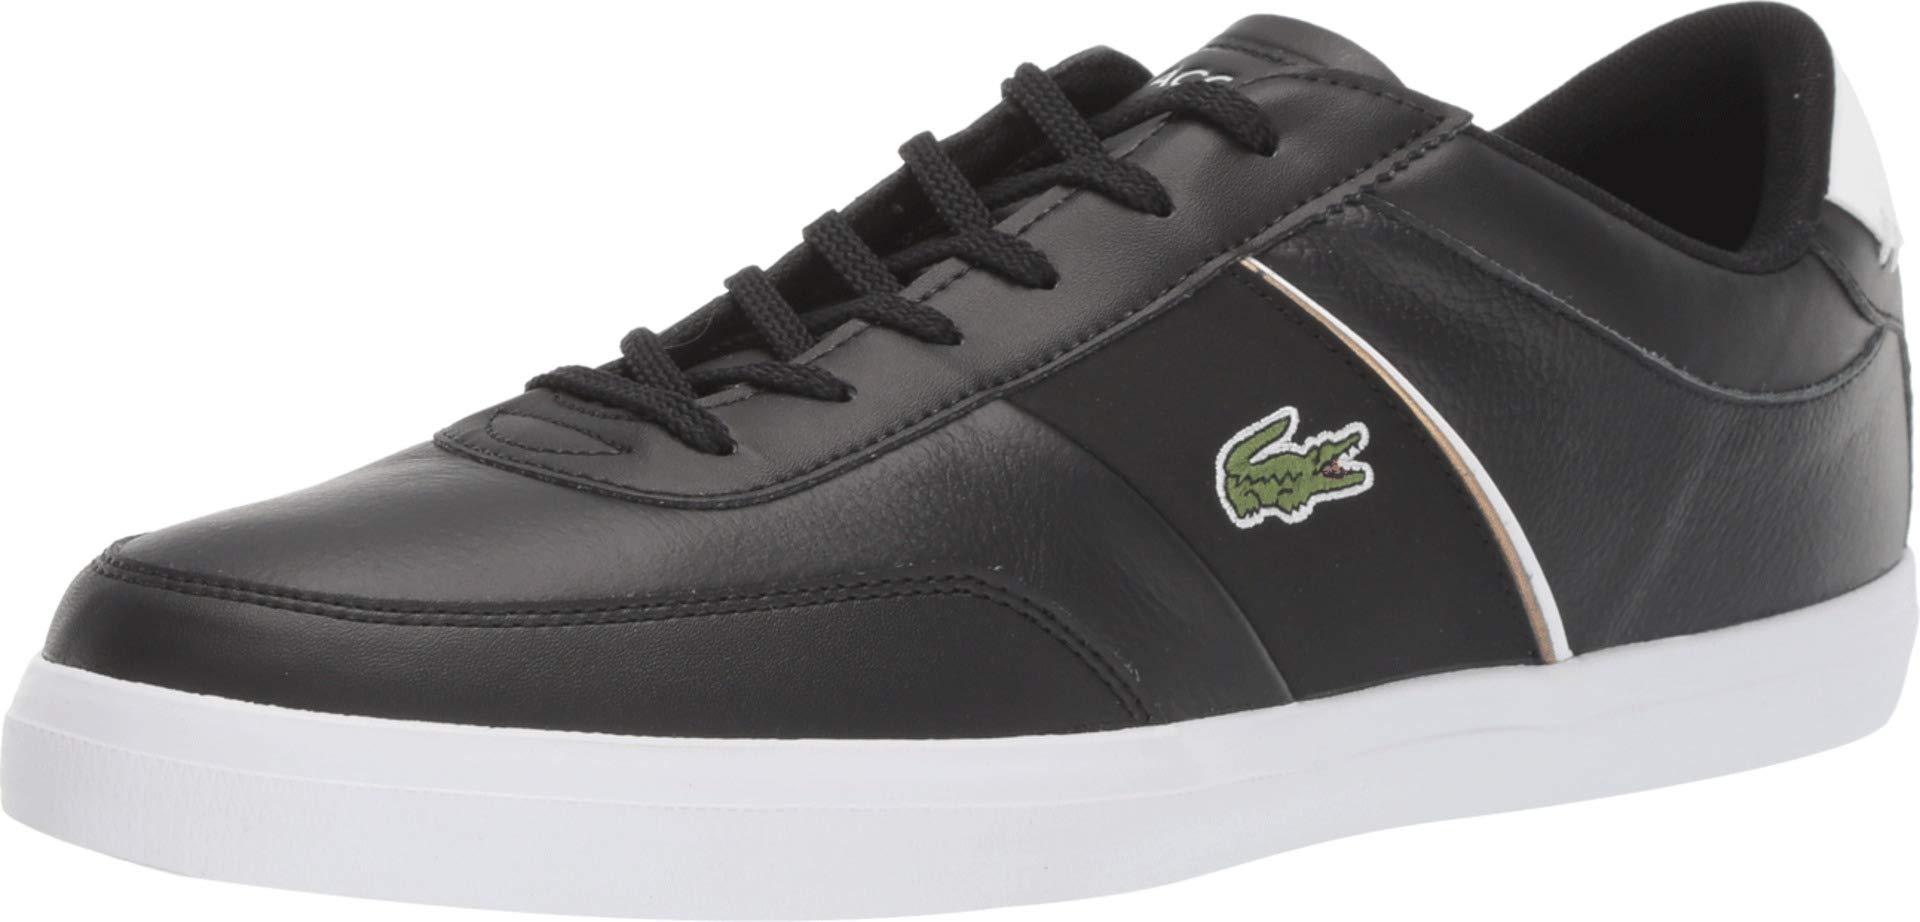 Lacoste Leather Court-master 319 6 Cma Trainers in Black for Men - Lyst